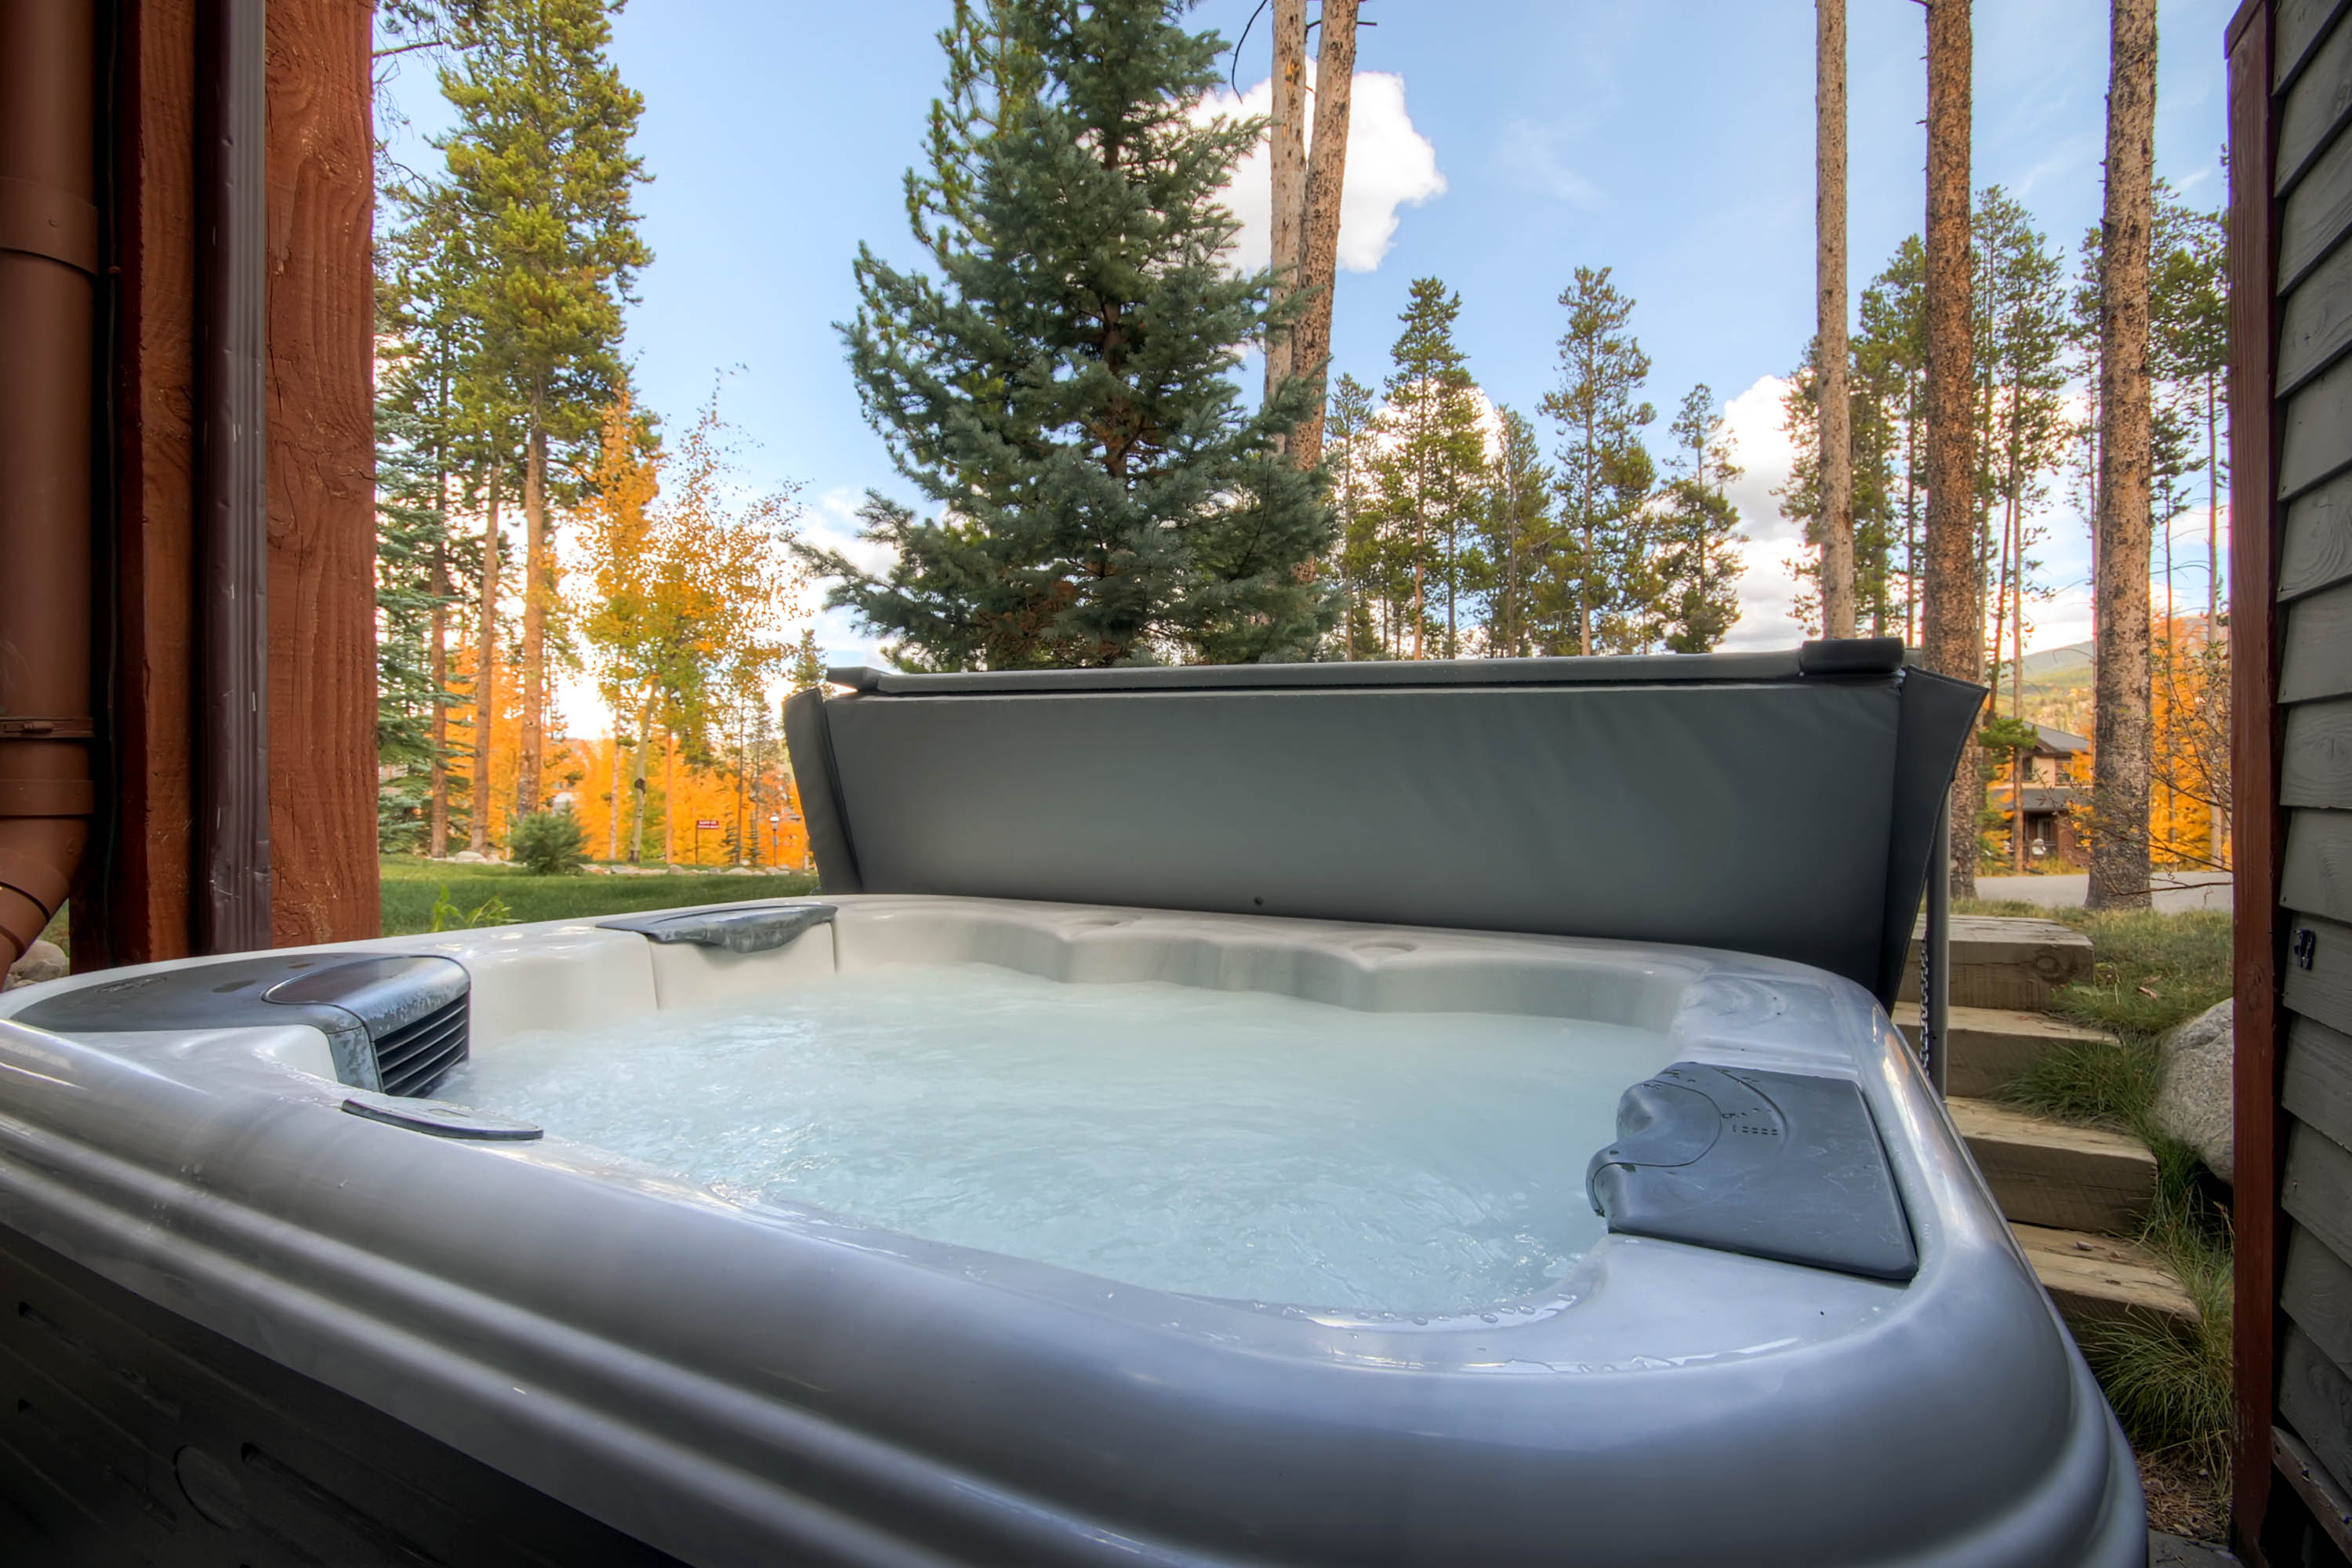 Soak in this large hot tub after a chilly day on the ski slopes - Amber Sky Breckenridge Vacation Rental